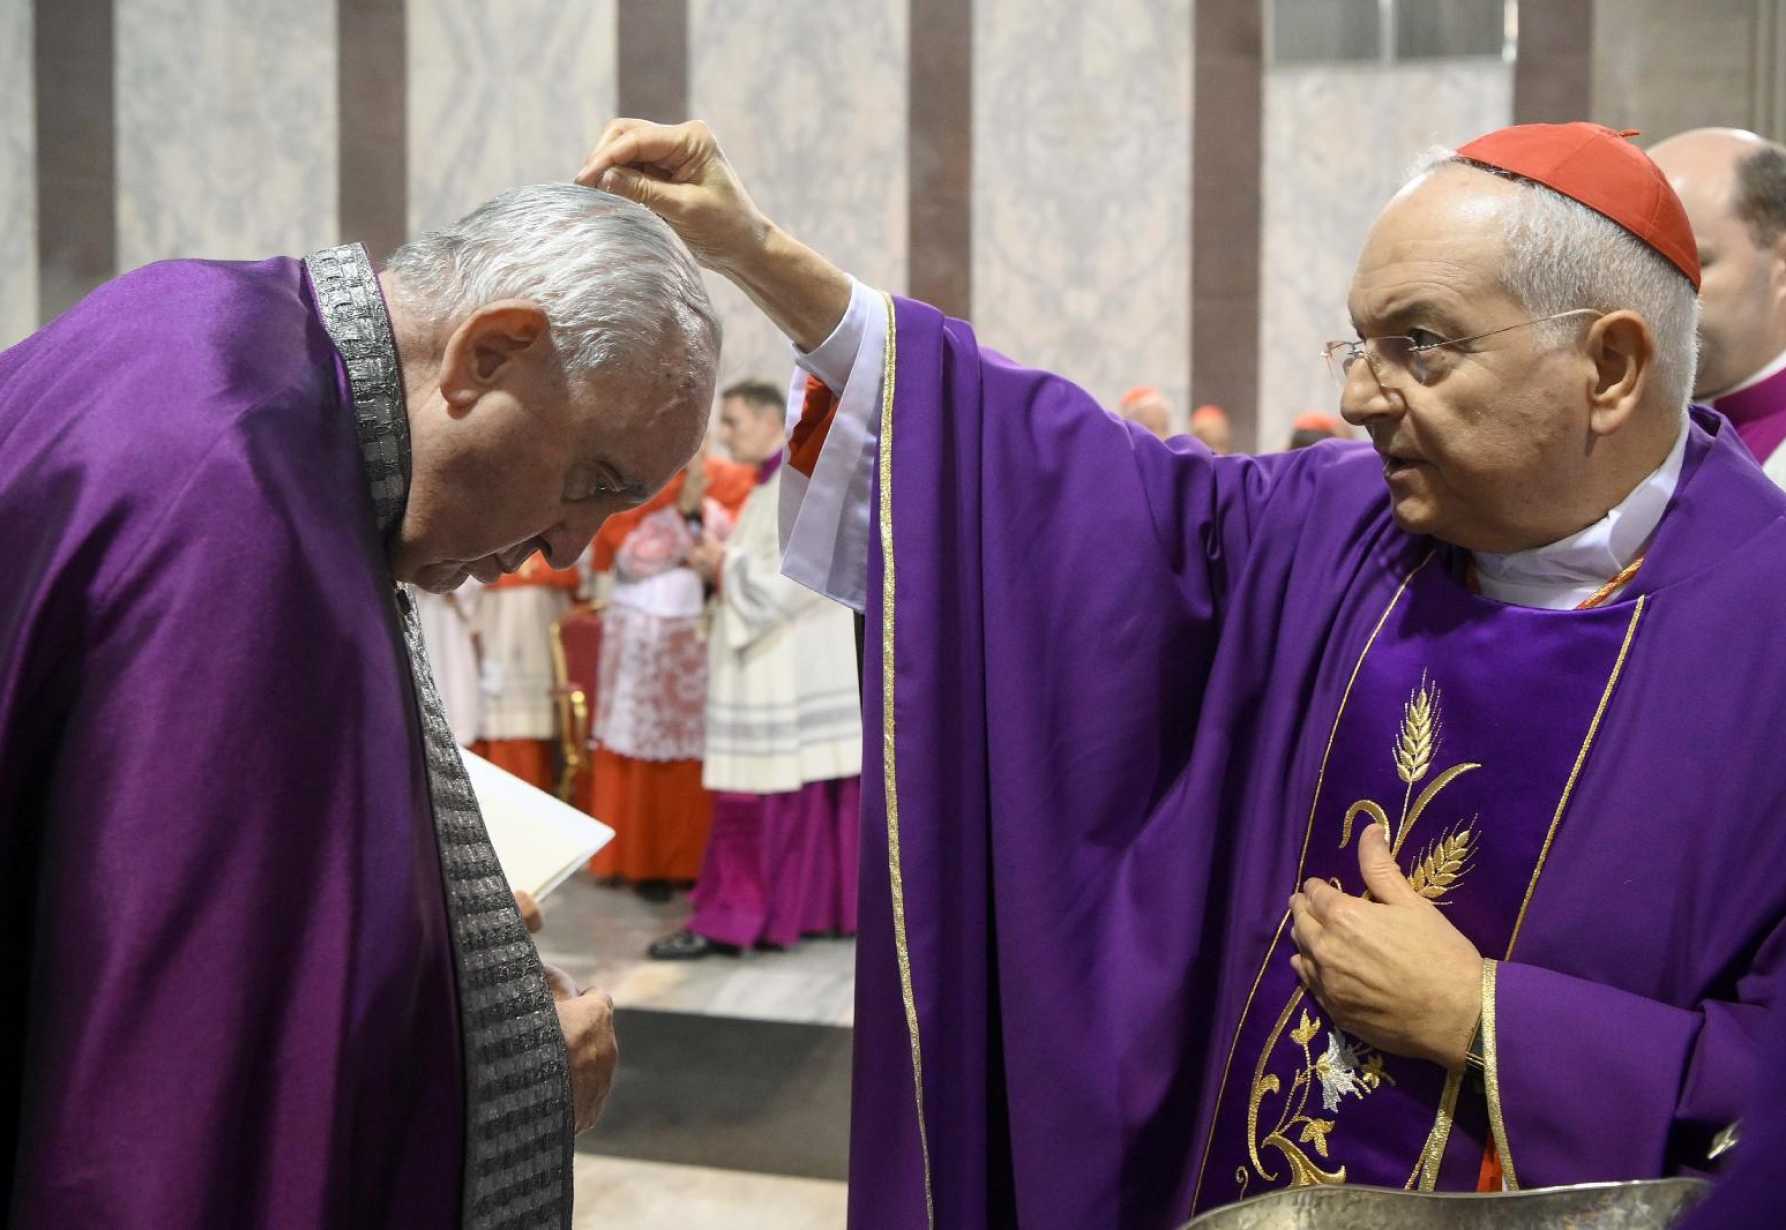 Pope says Lent is time to let go of the frivolous, to choose truth, love